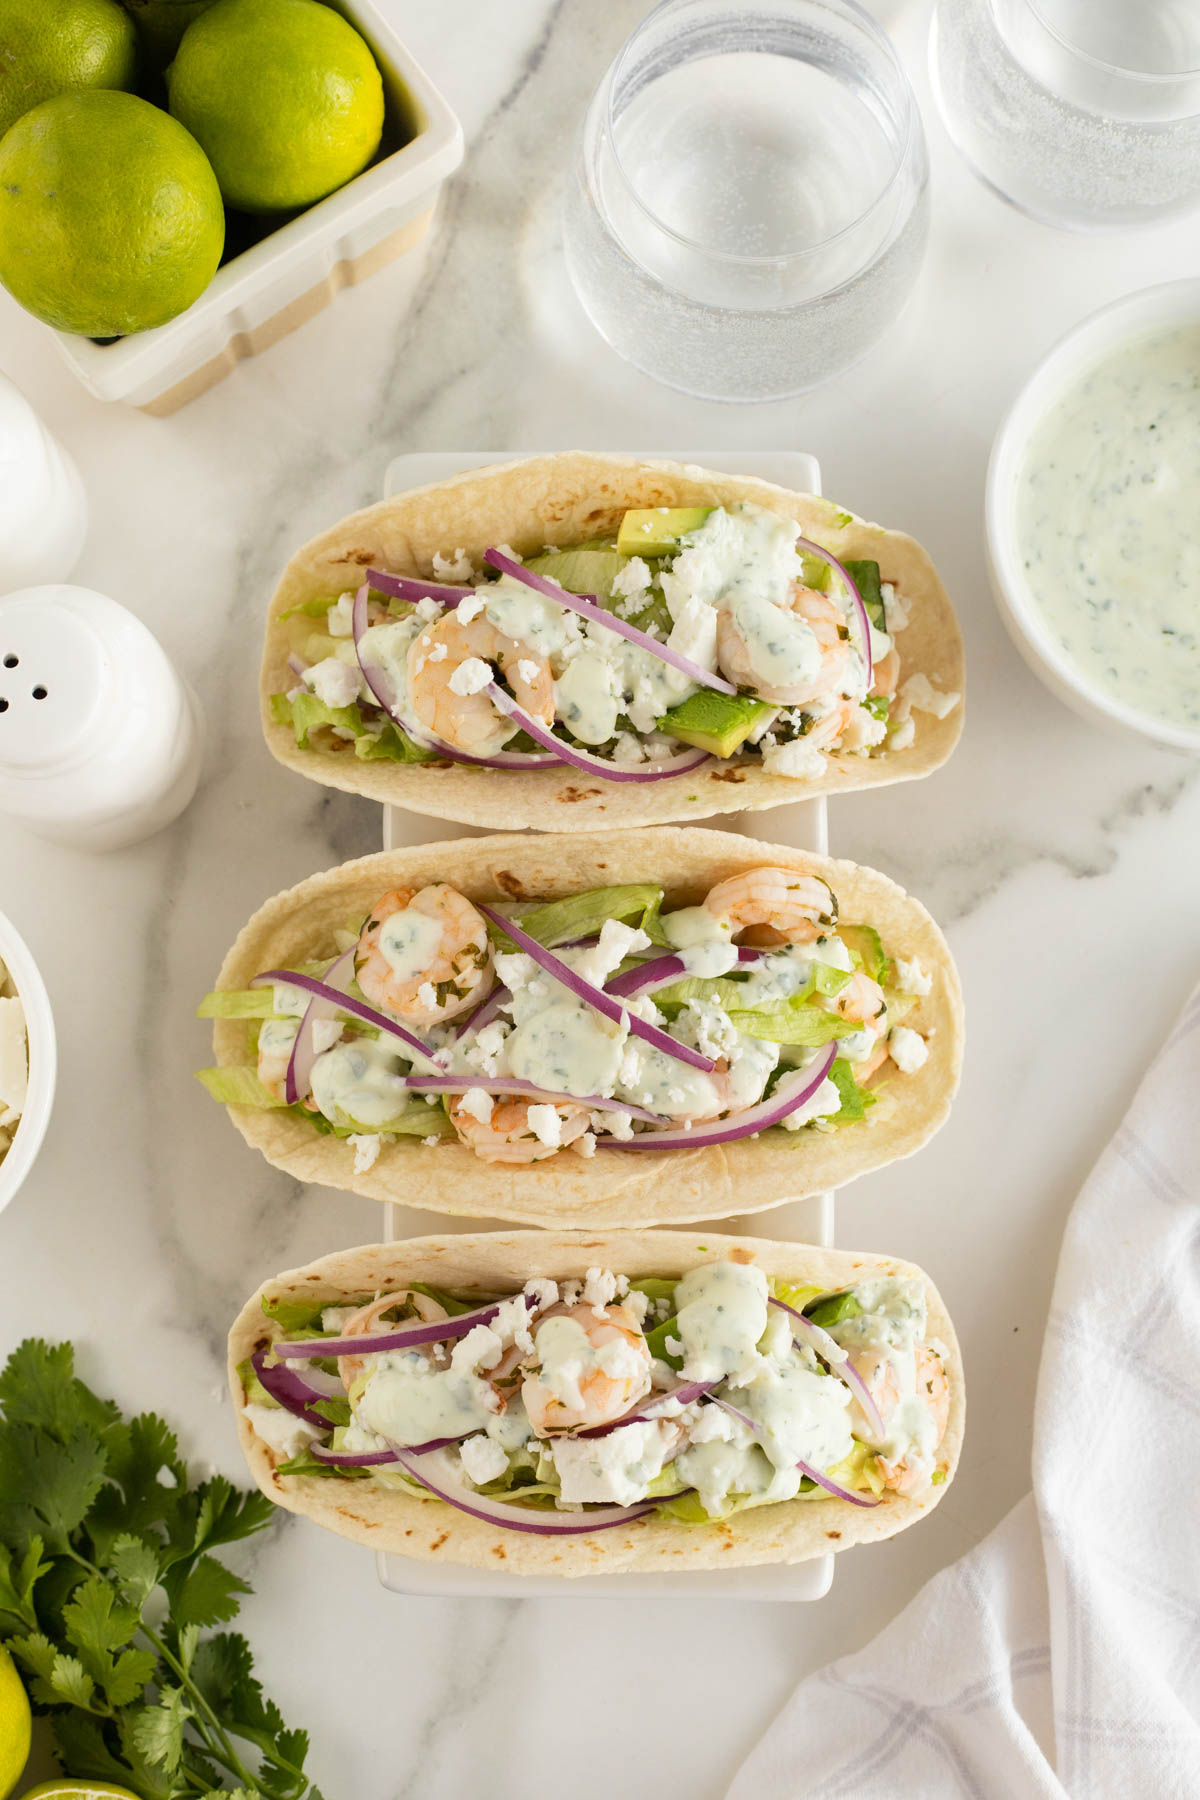 A group of shrimp tacos with sauces and vegetables.